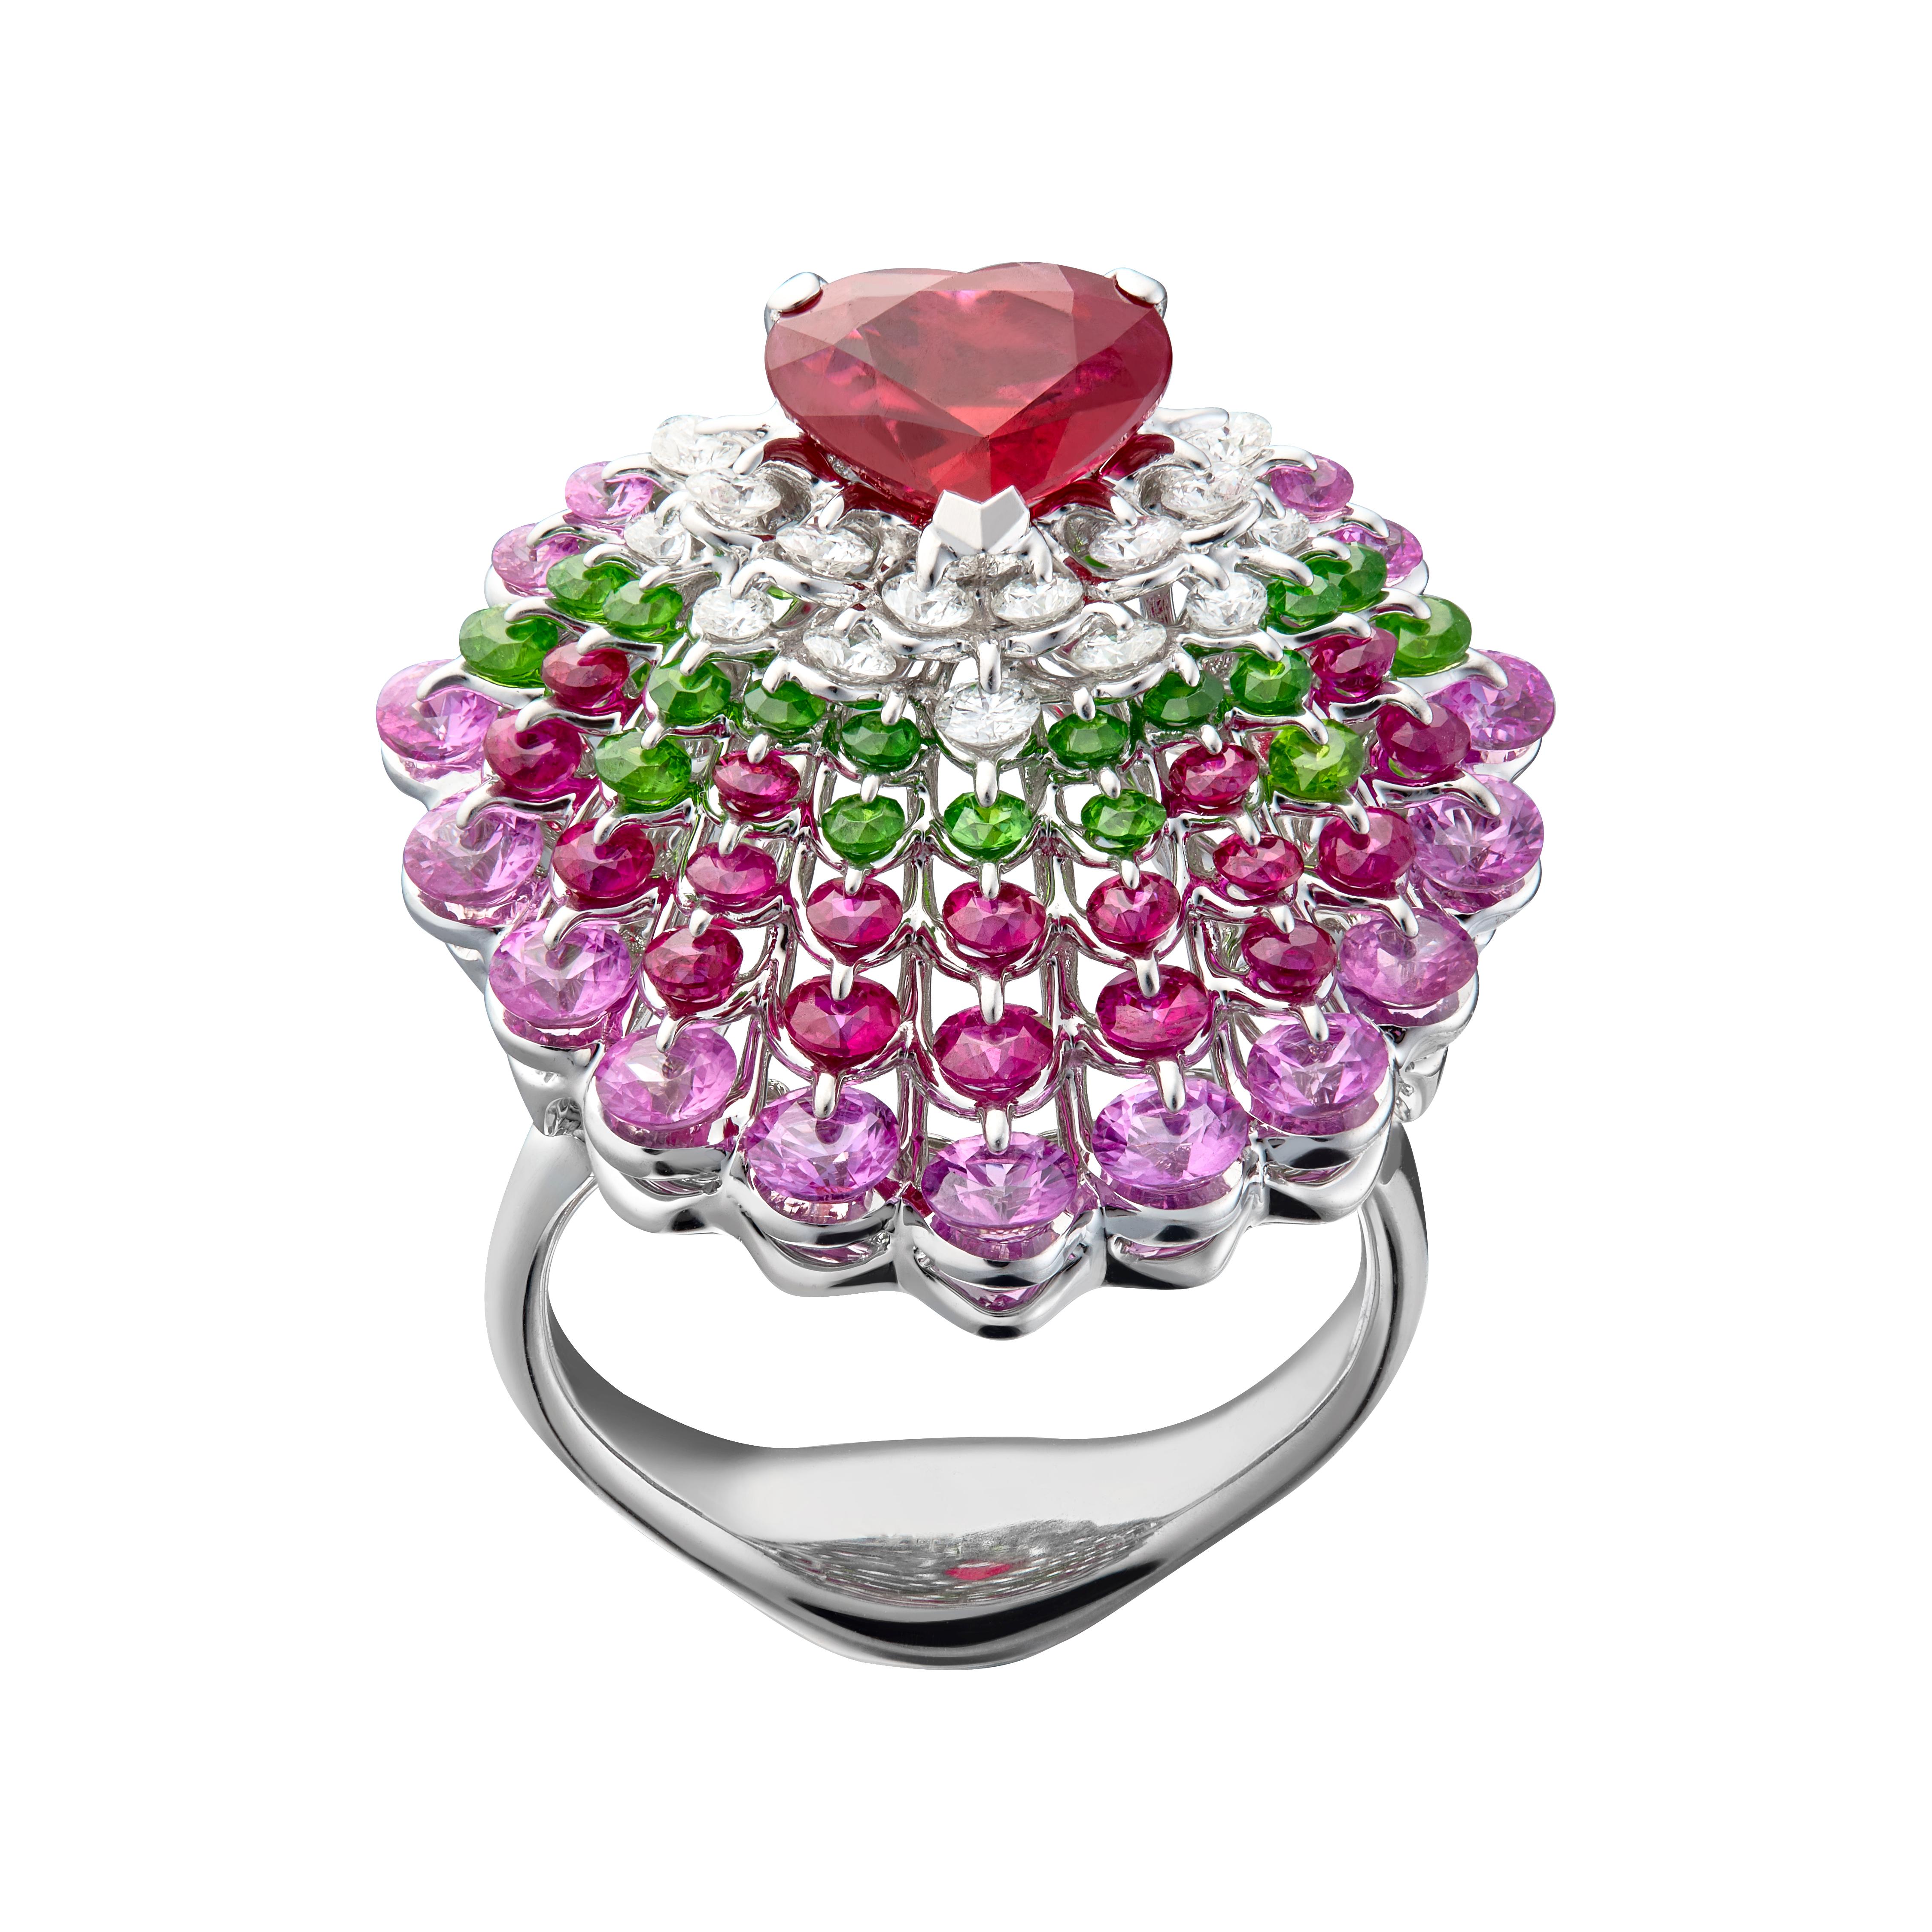 2-carat heart-shaped Ruby from Burma origin is mounted in a graceful peacock design. Its colourful feathers contain flawless diamonds, rare Russian demantoid garnets, and feminine pink sapphires, using the patented Waltzing Brilliance technology in